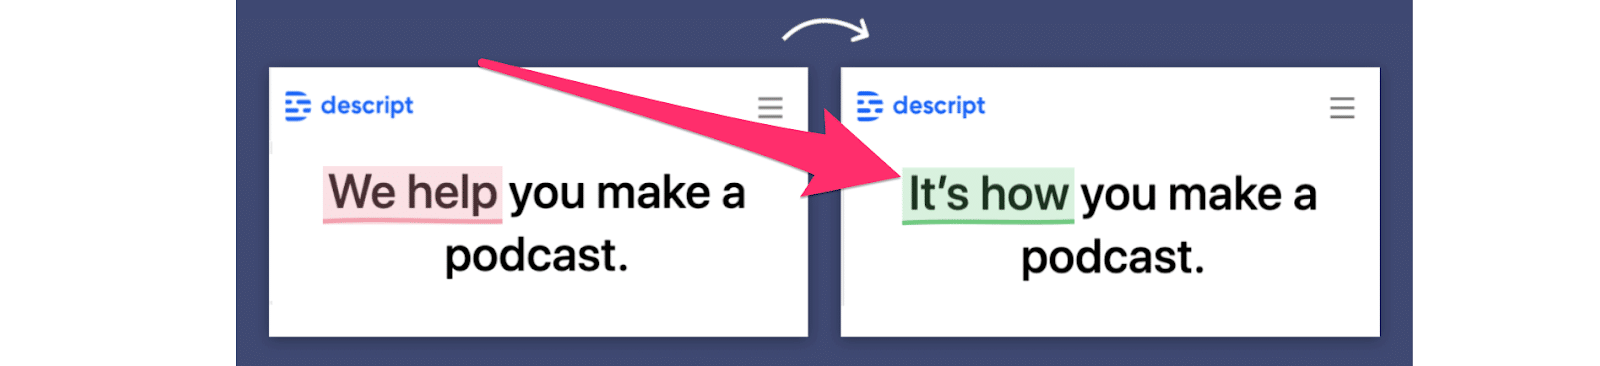 the phrase it's how is highlighted in green on the landing page